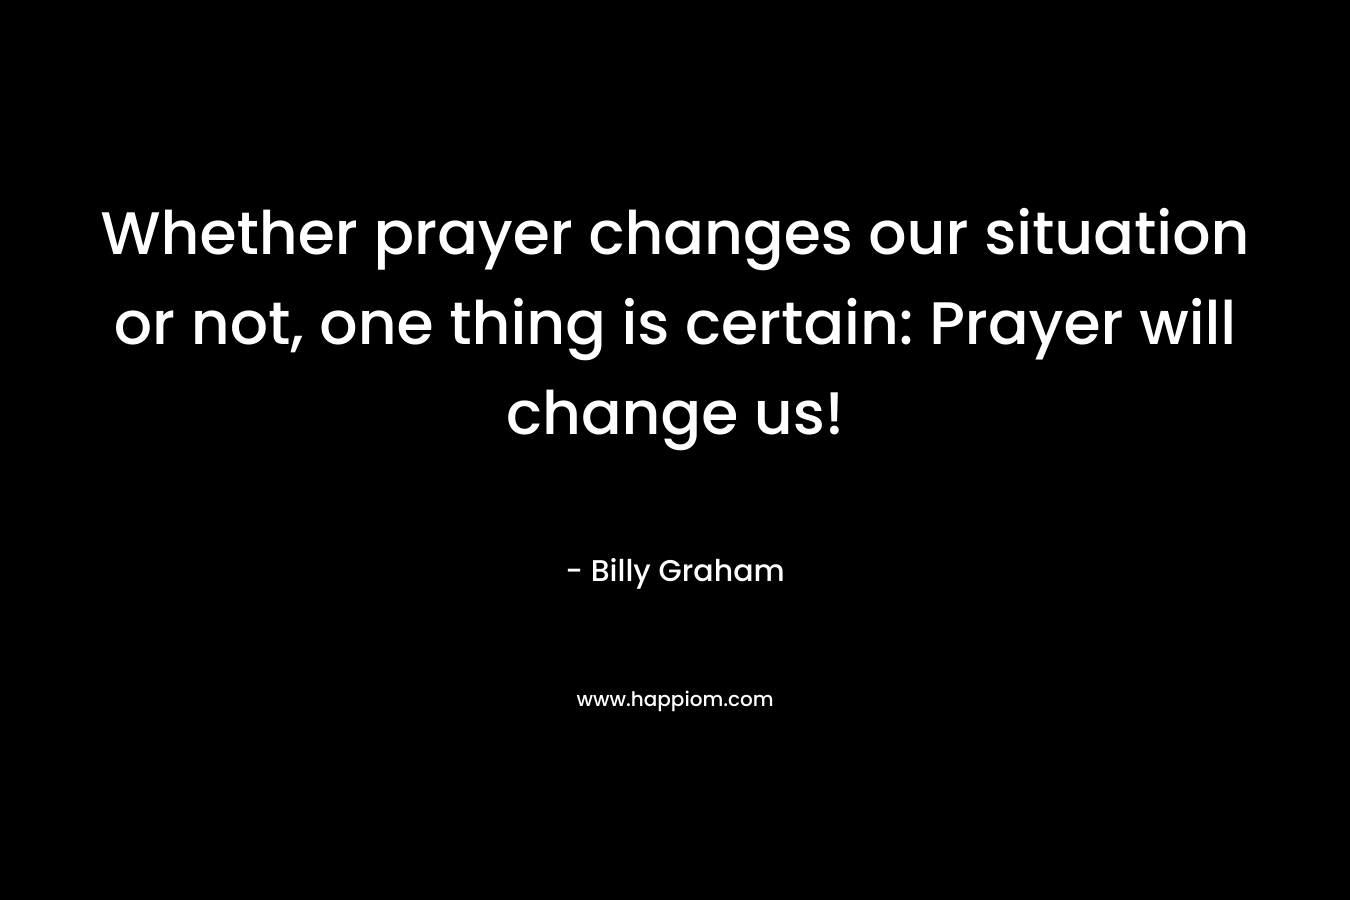 Whether prayer changes our situation or not, one thing is certain: Prayer will change us!